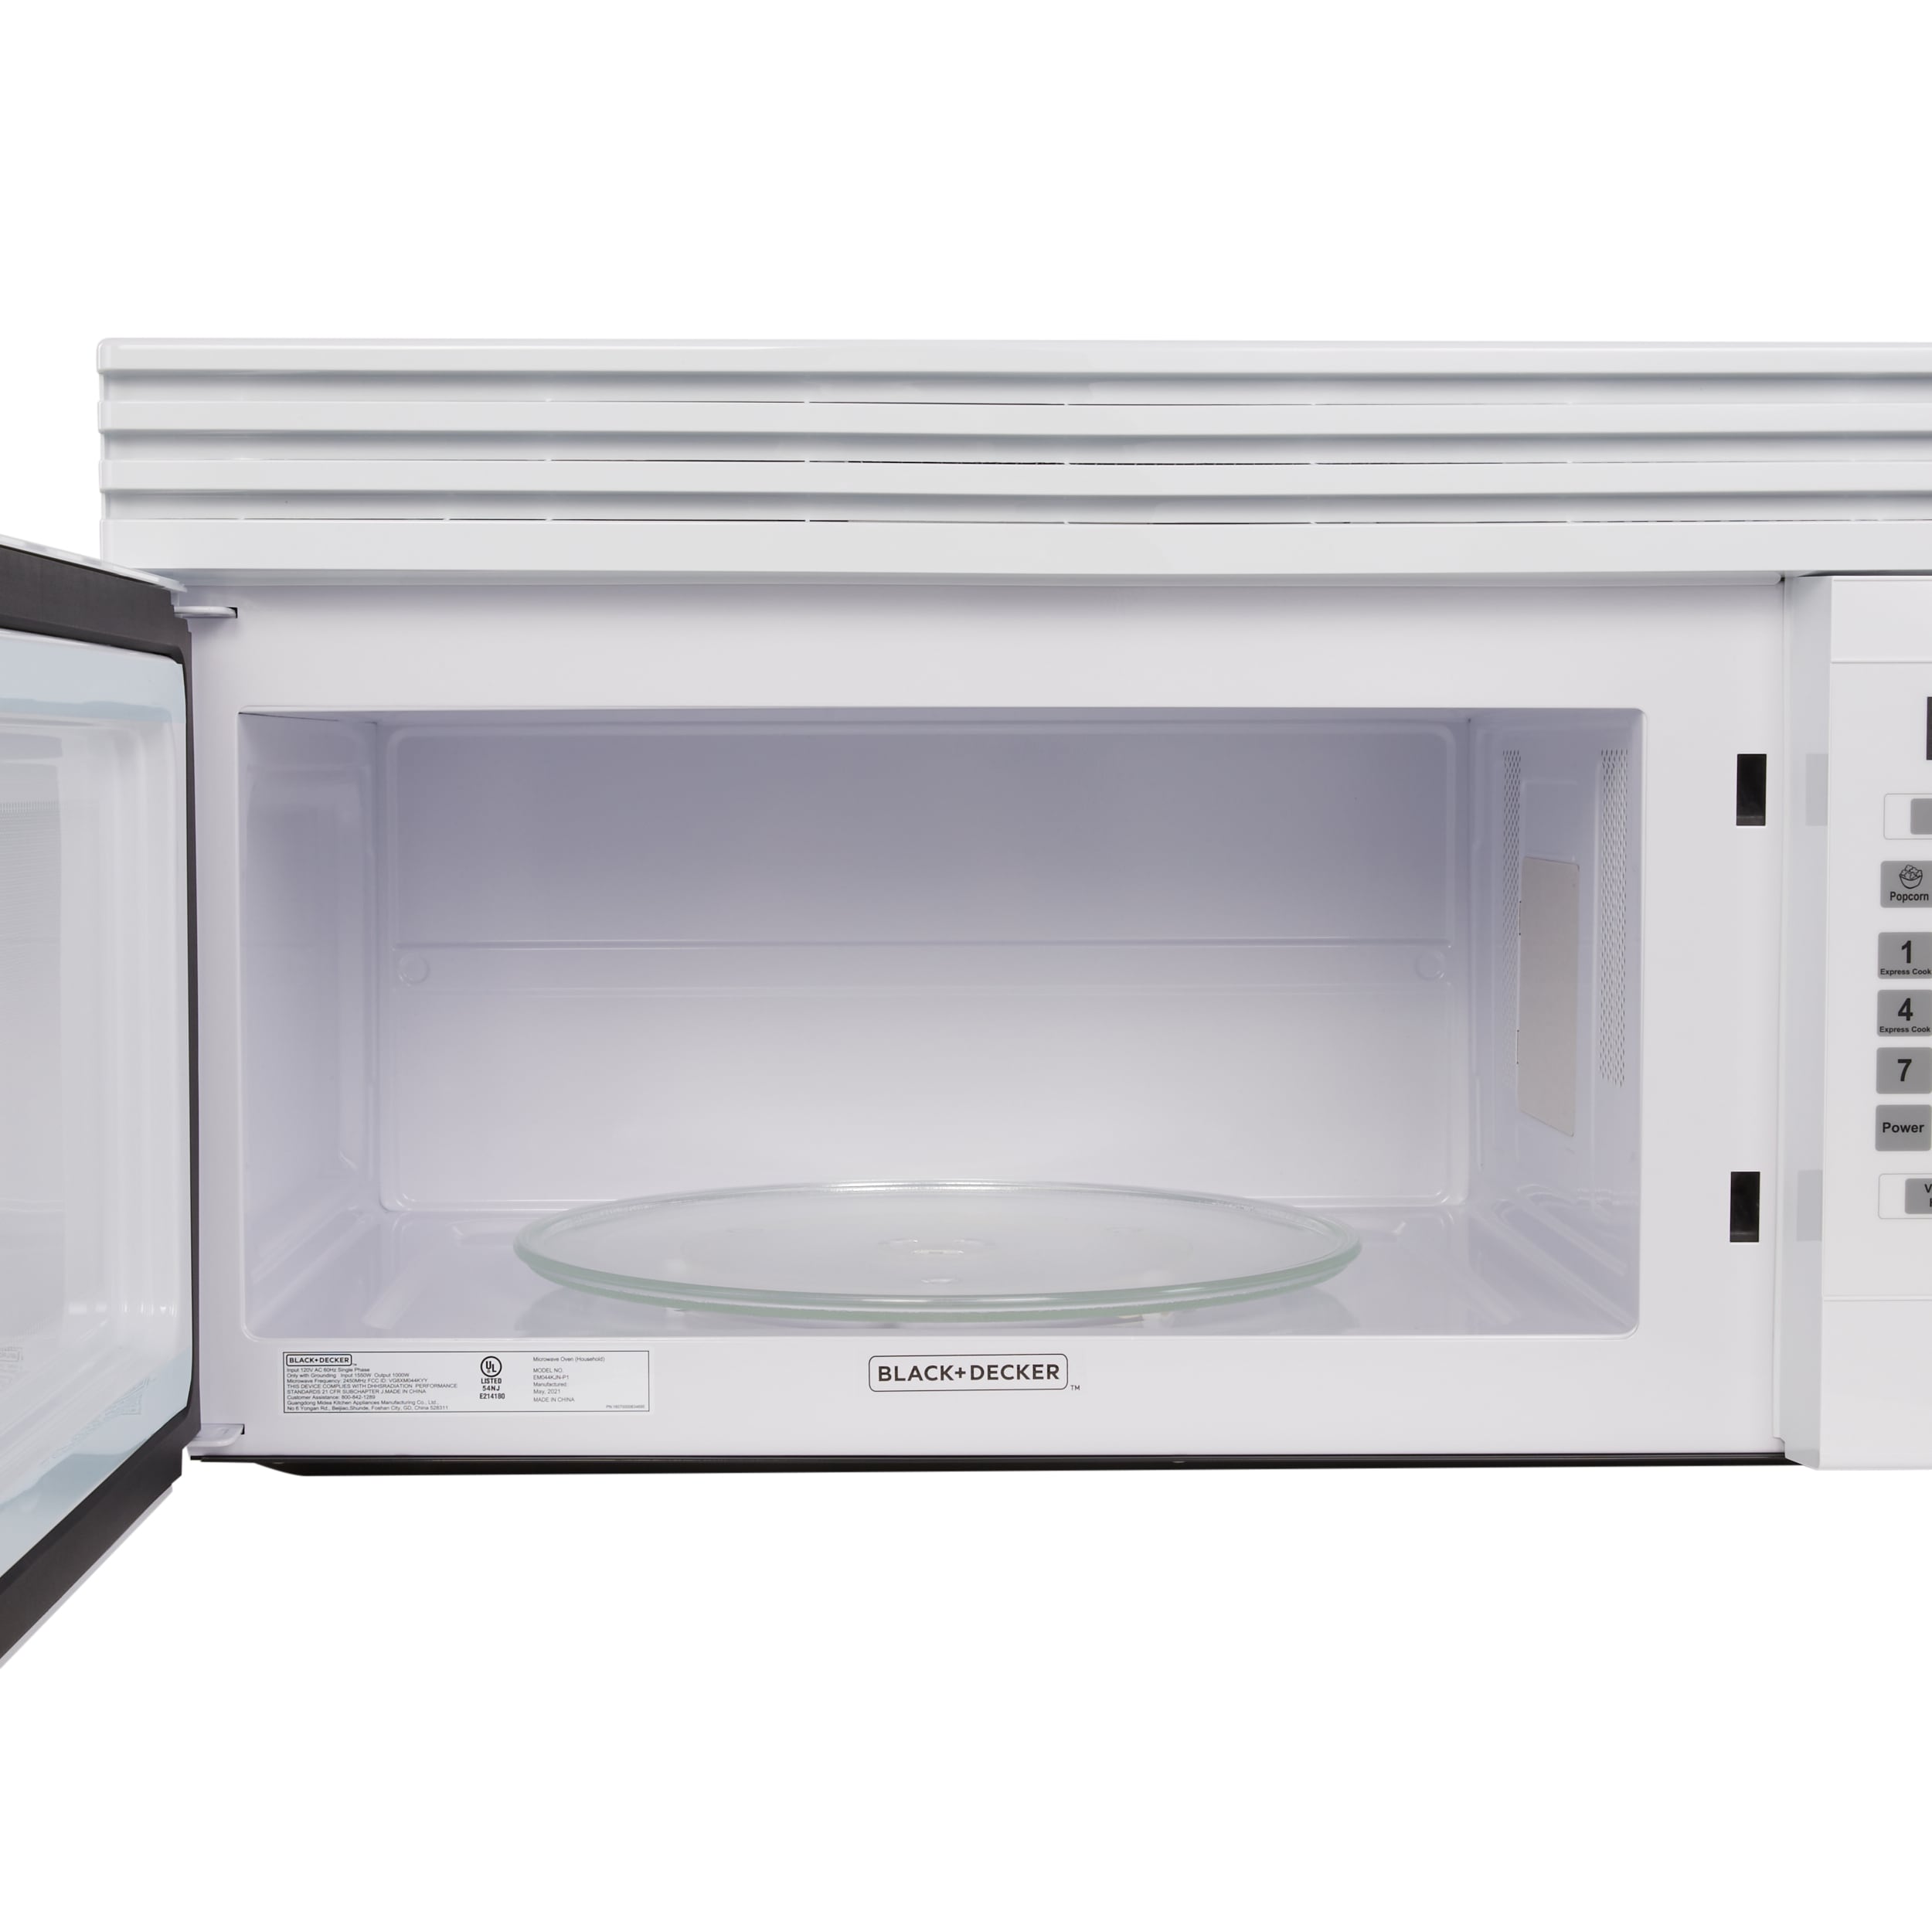 BLACK+DECKER EM044KB19 Over The Range Microwave Oven with One